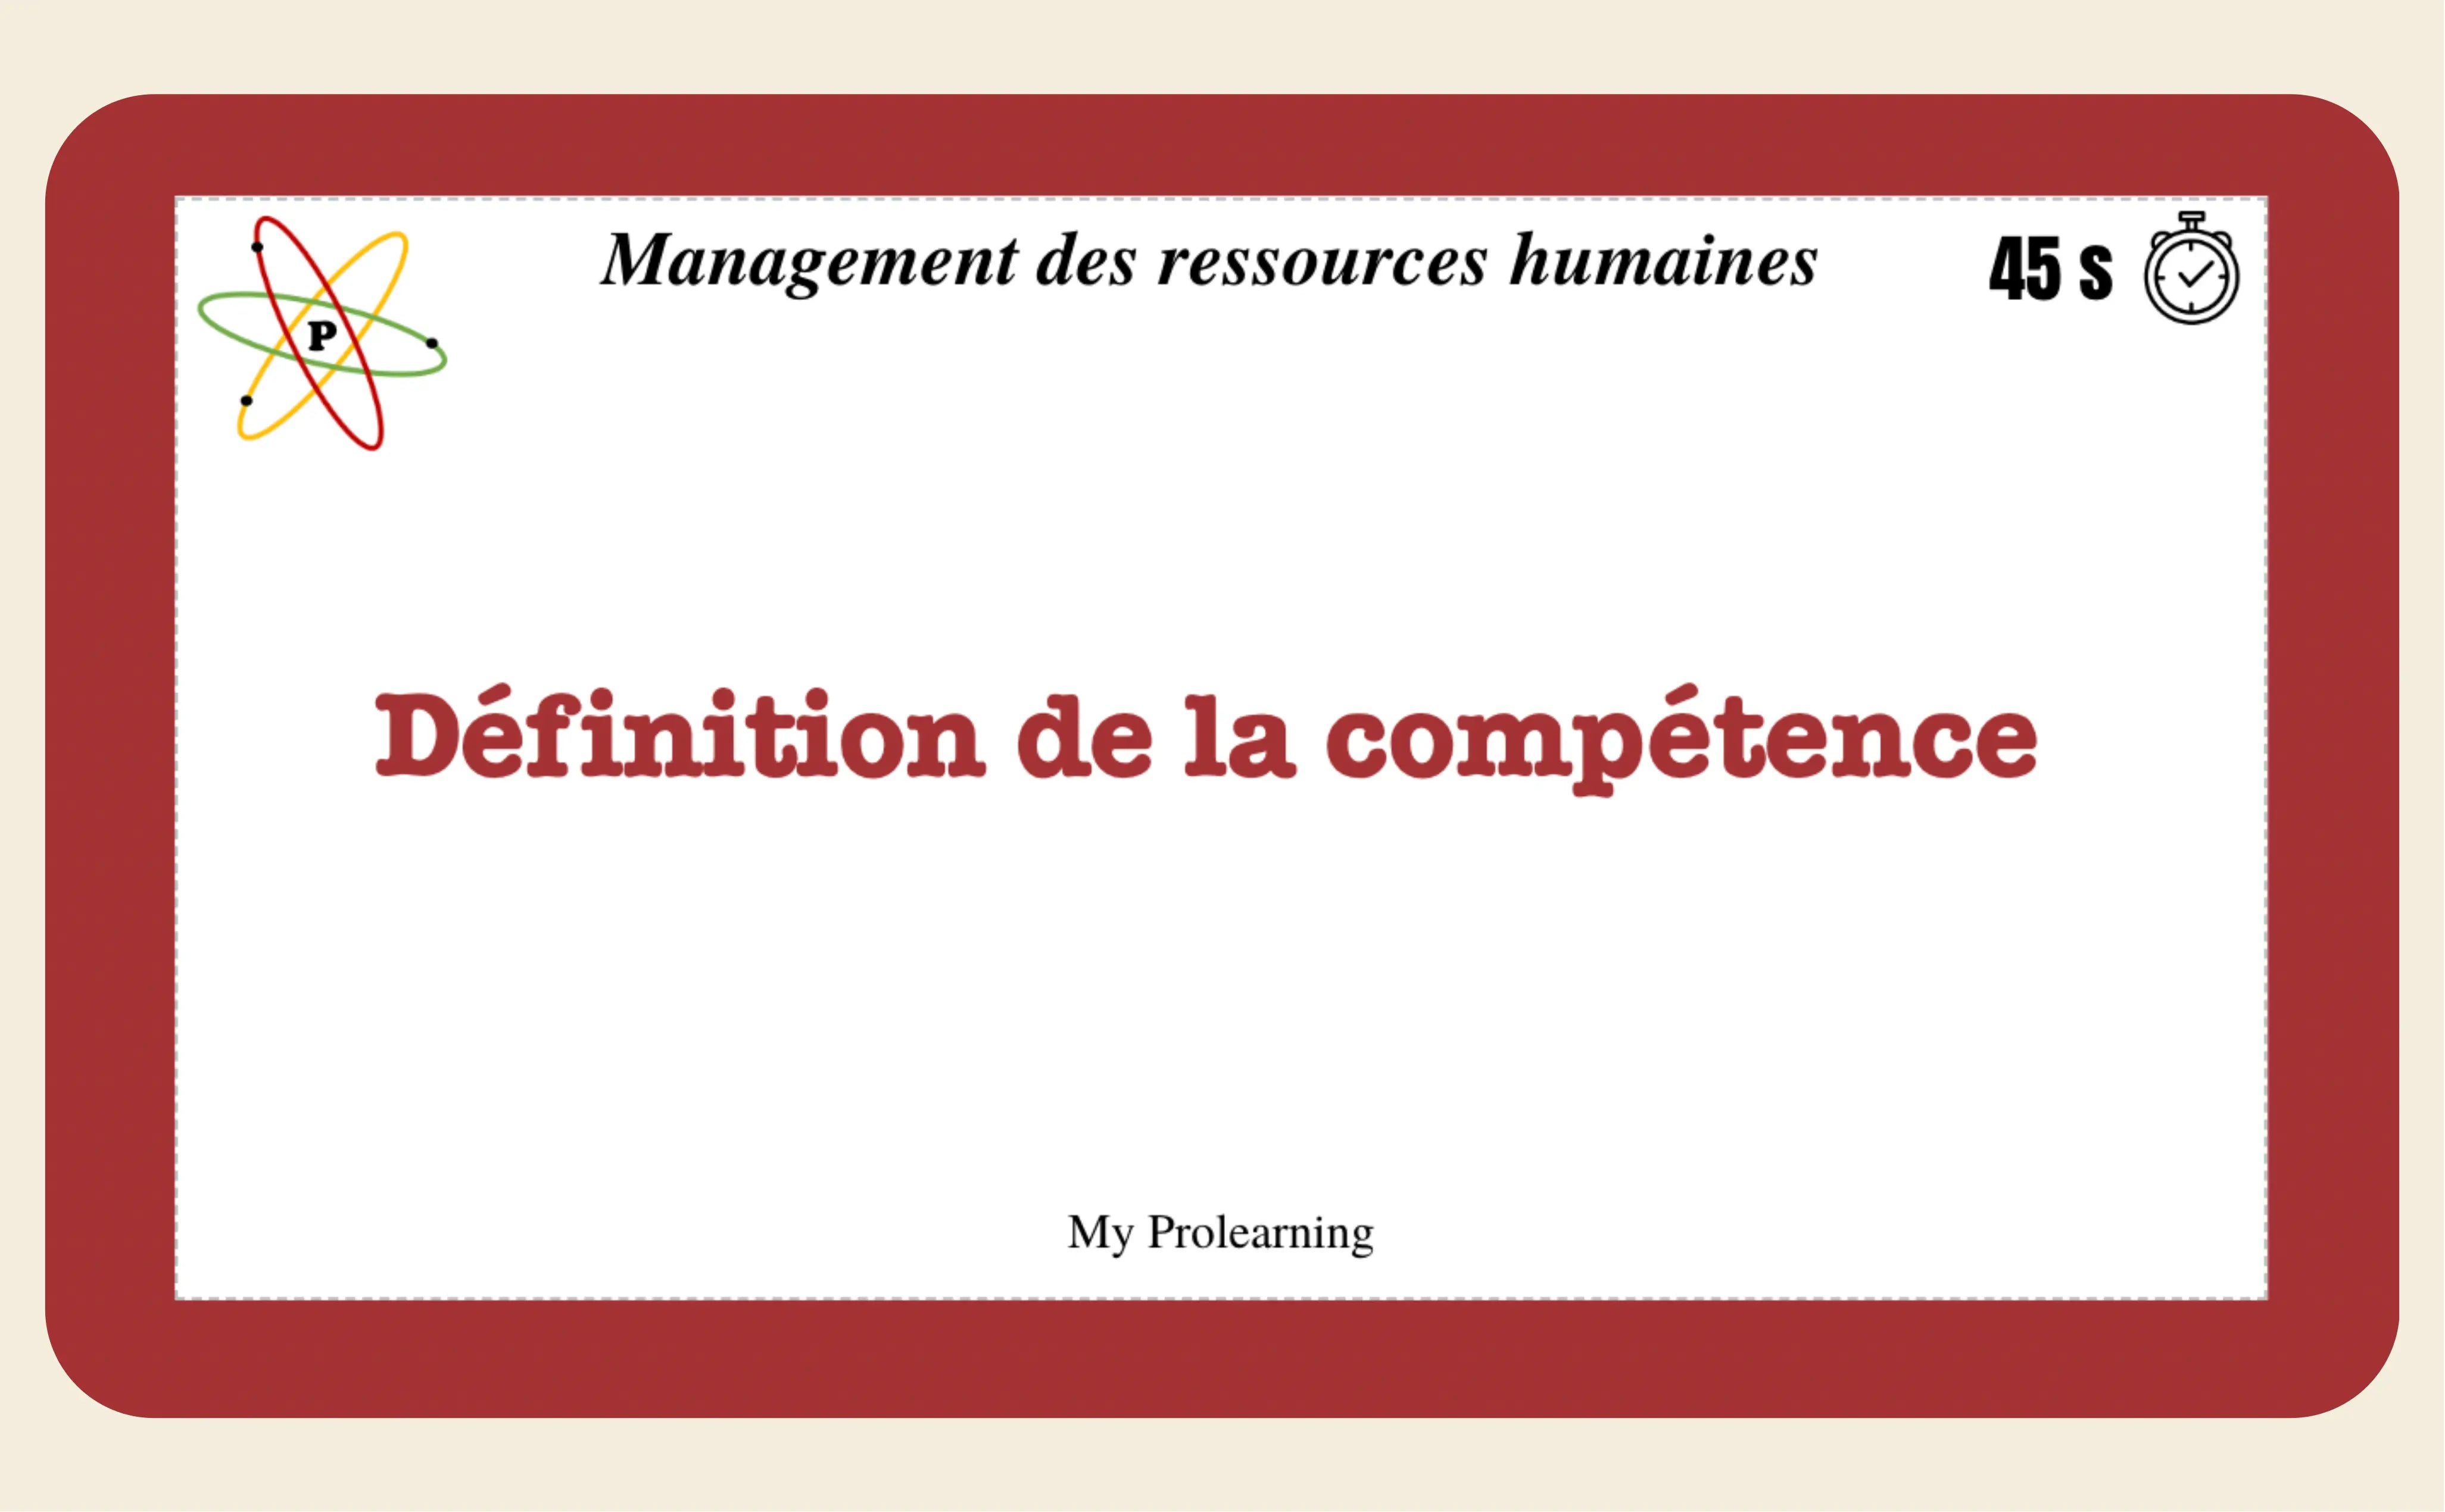 FICHES MANAGEMENT DES RESSOURCES HUMAINES - My Prolearning 